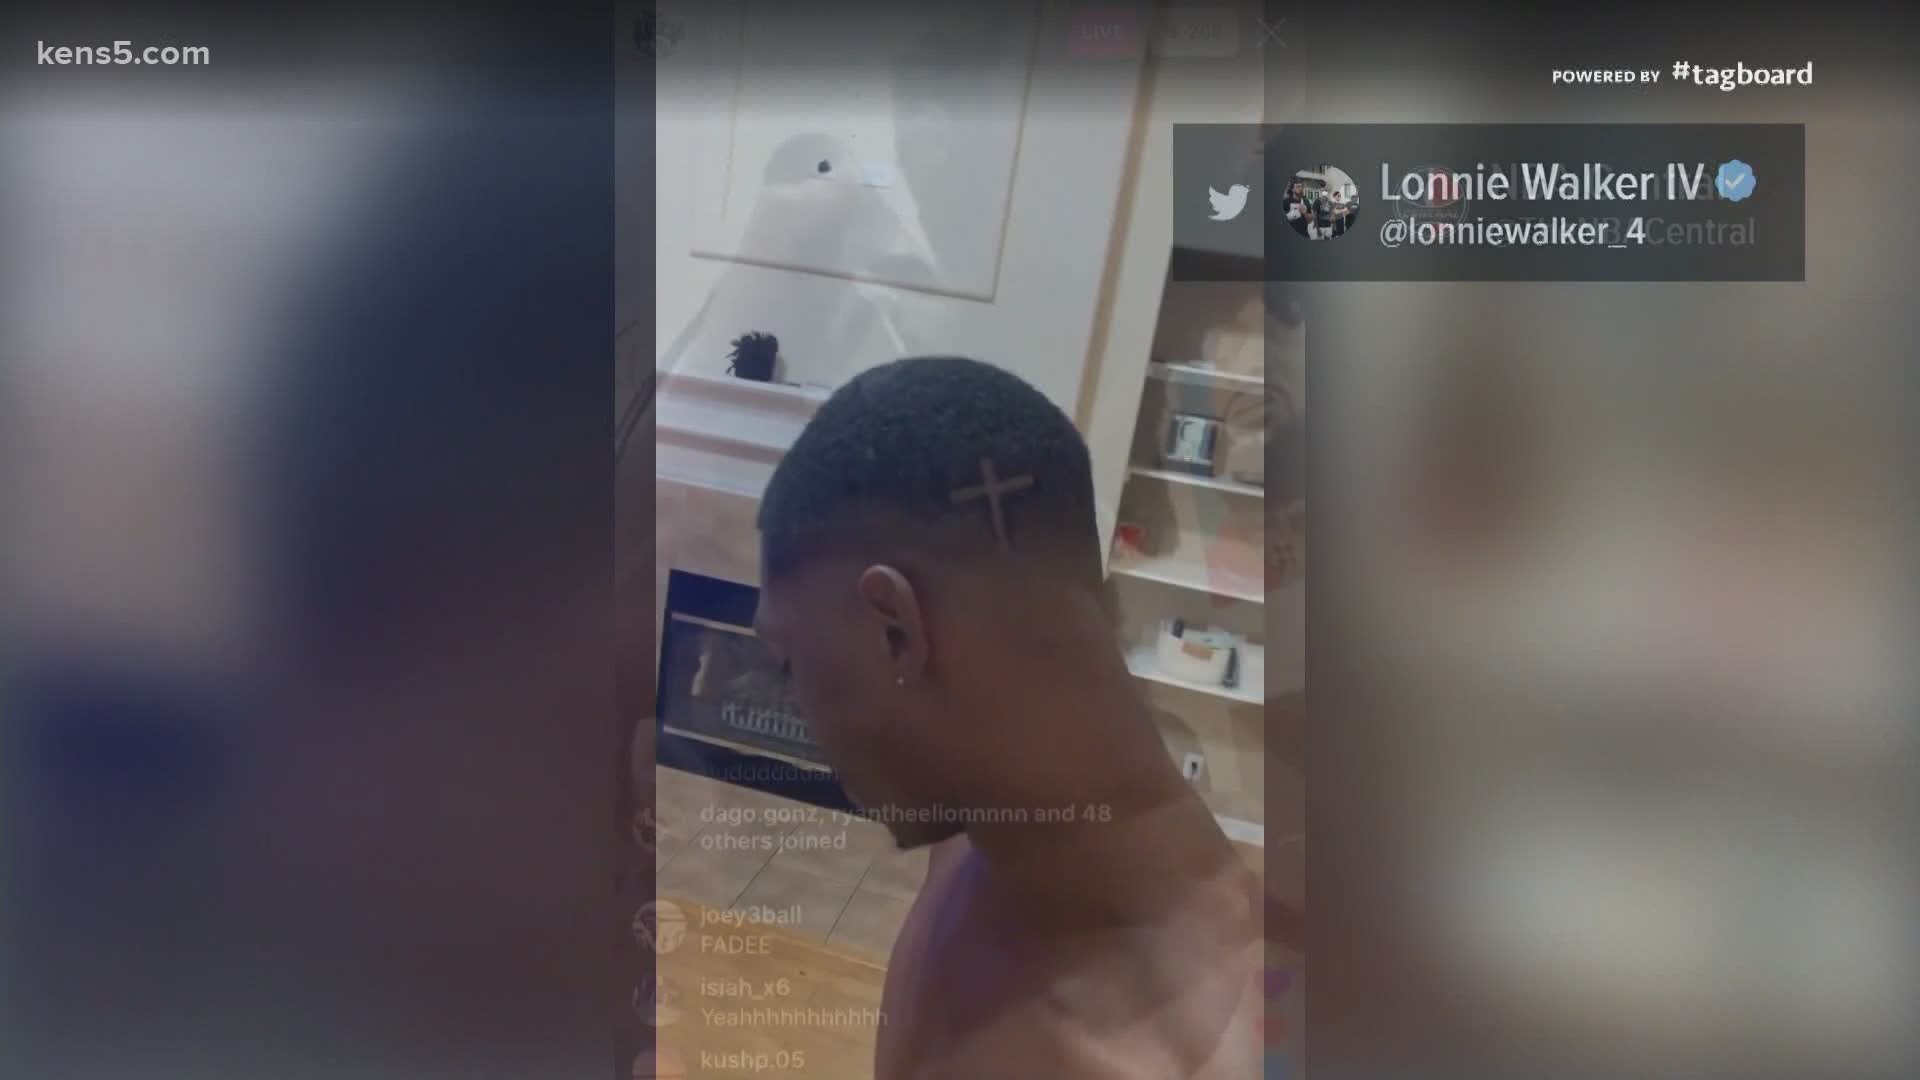 Spurs player Lonnie Walker IV cuts off signature "pineapple" hair.